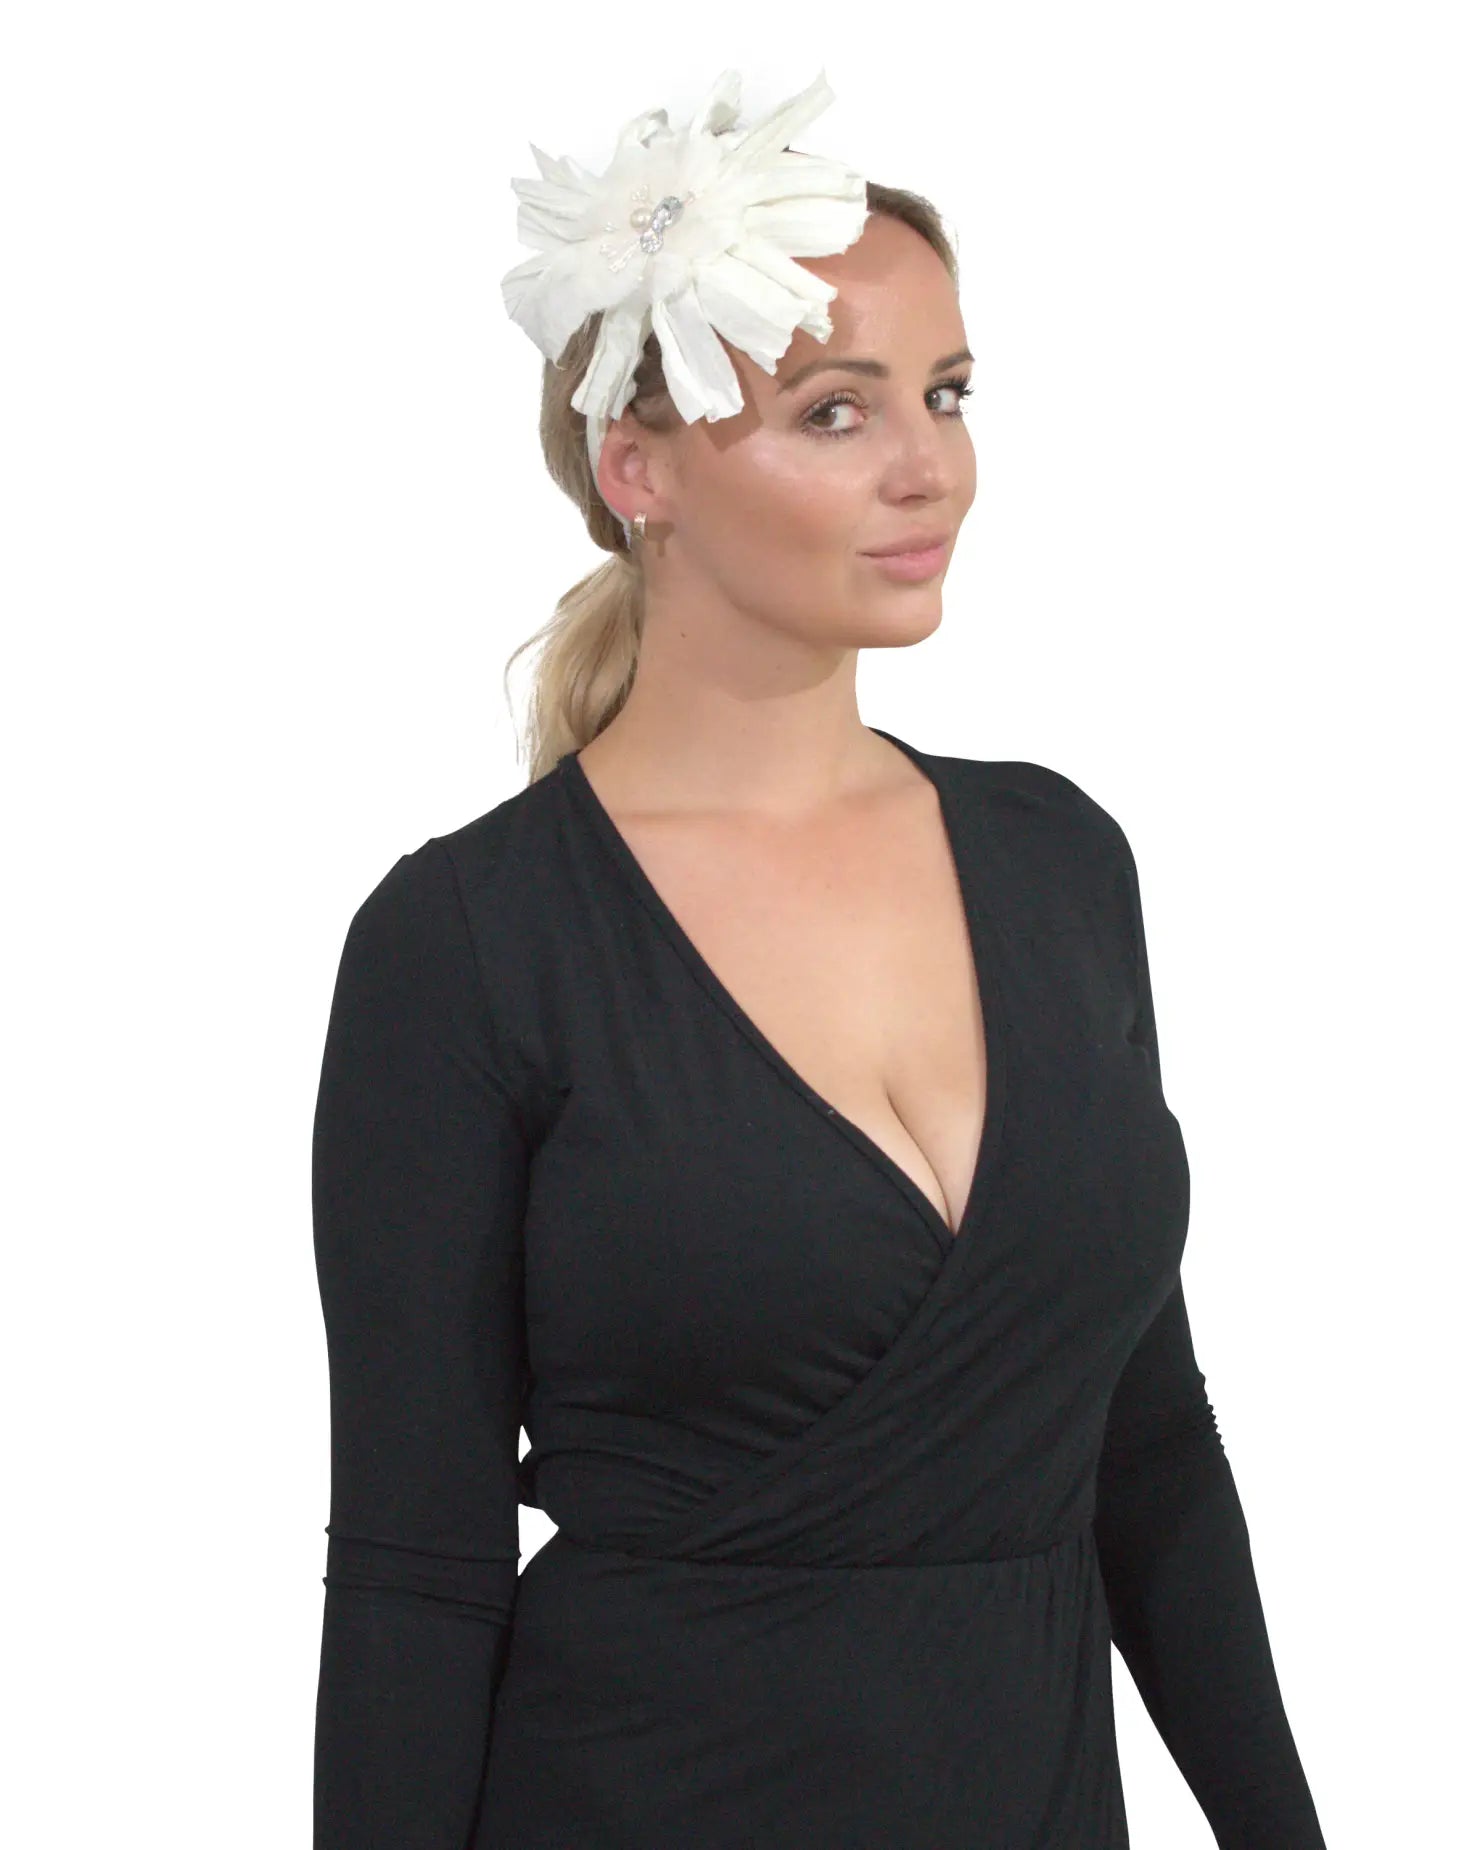 Woman wearing black dress with white flower headband for Large Crinkled 3D Flower with Rhinestone Applique